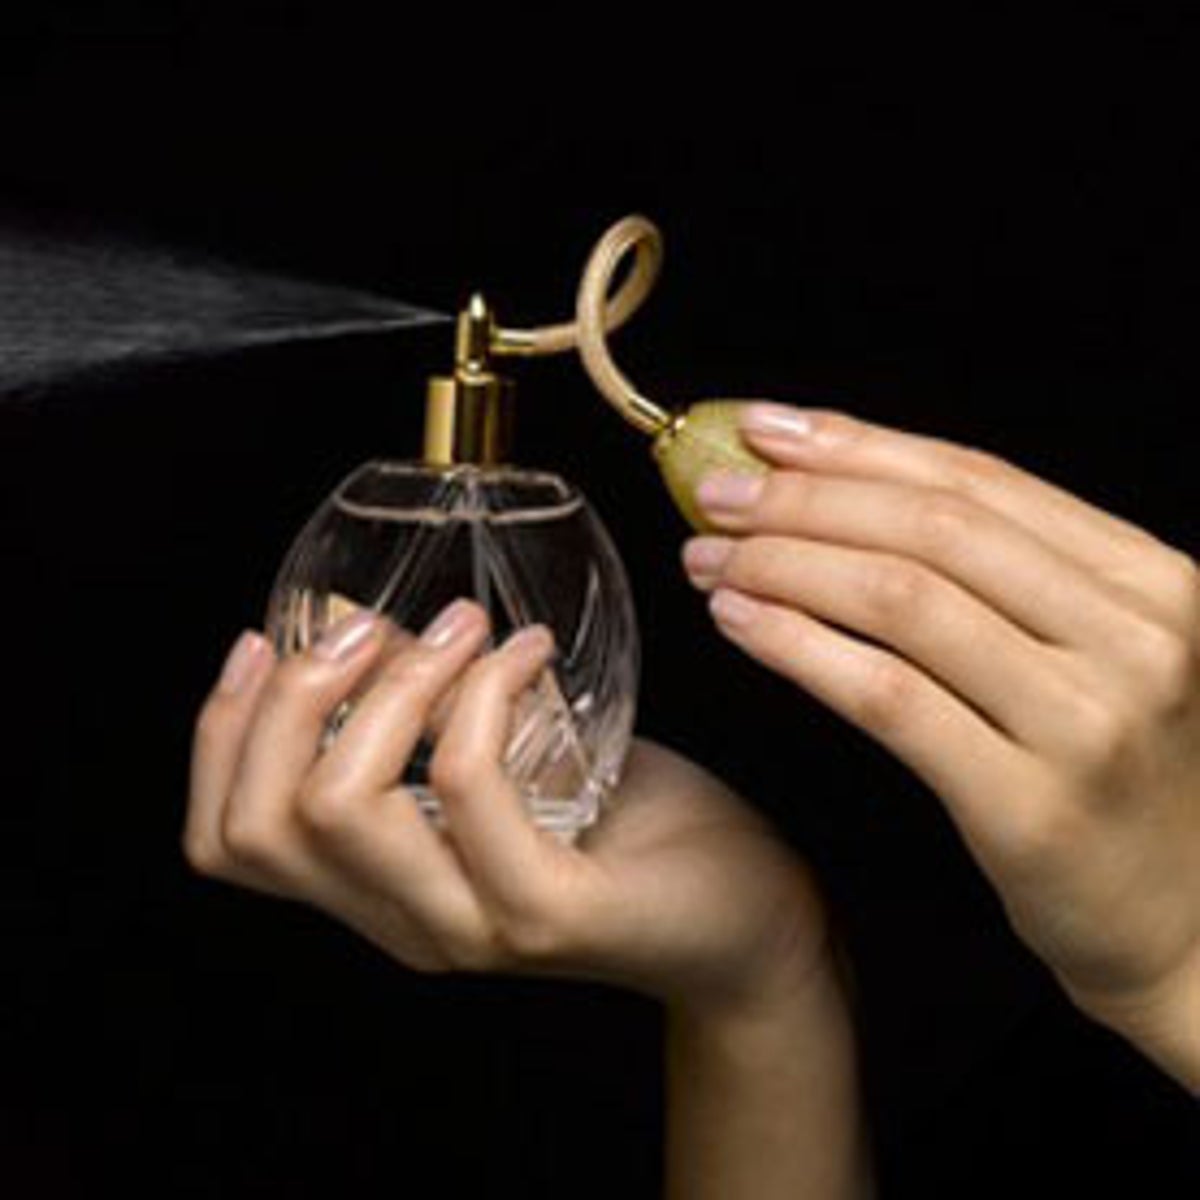 Perfume stinks - how fragrances can affect health